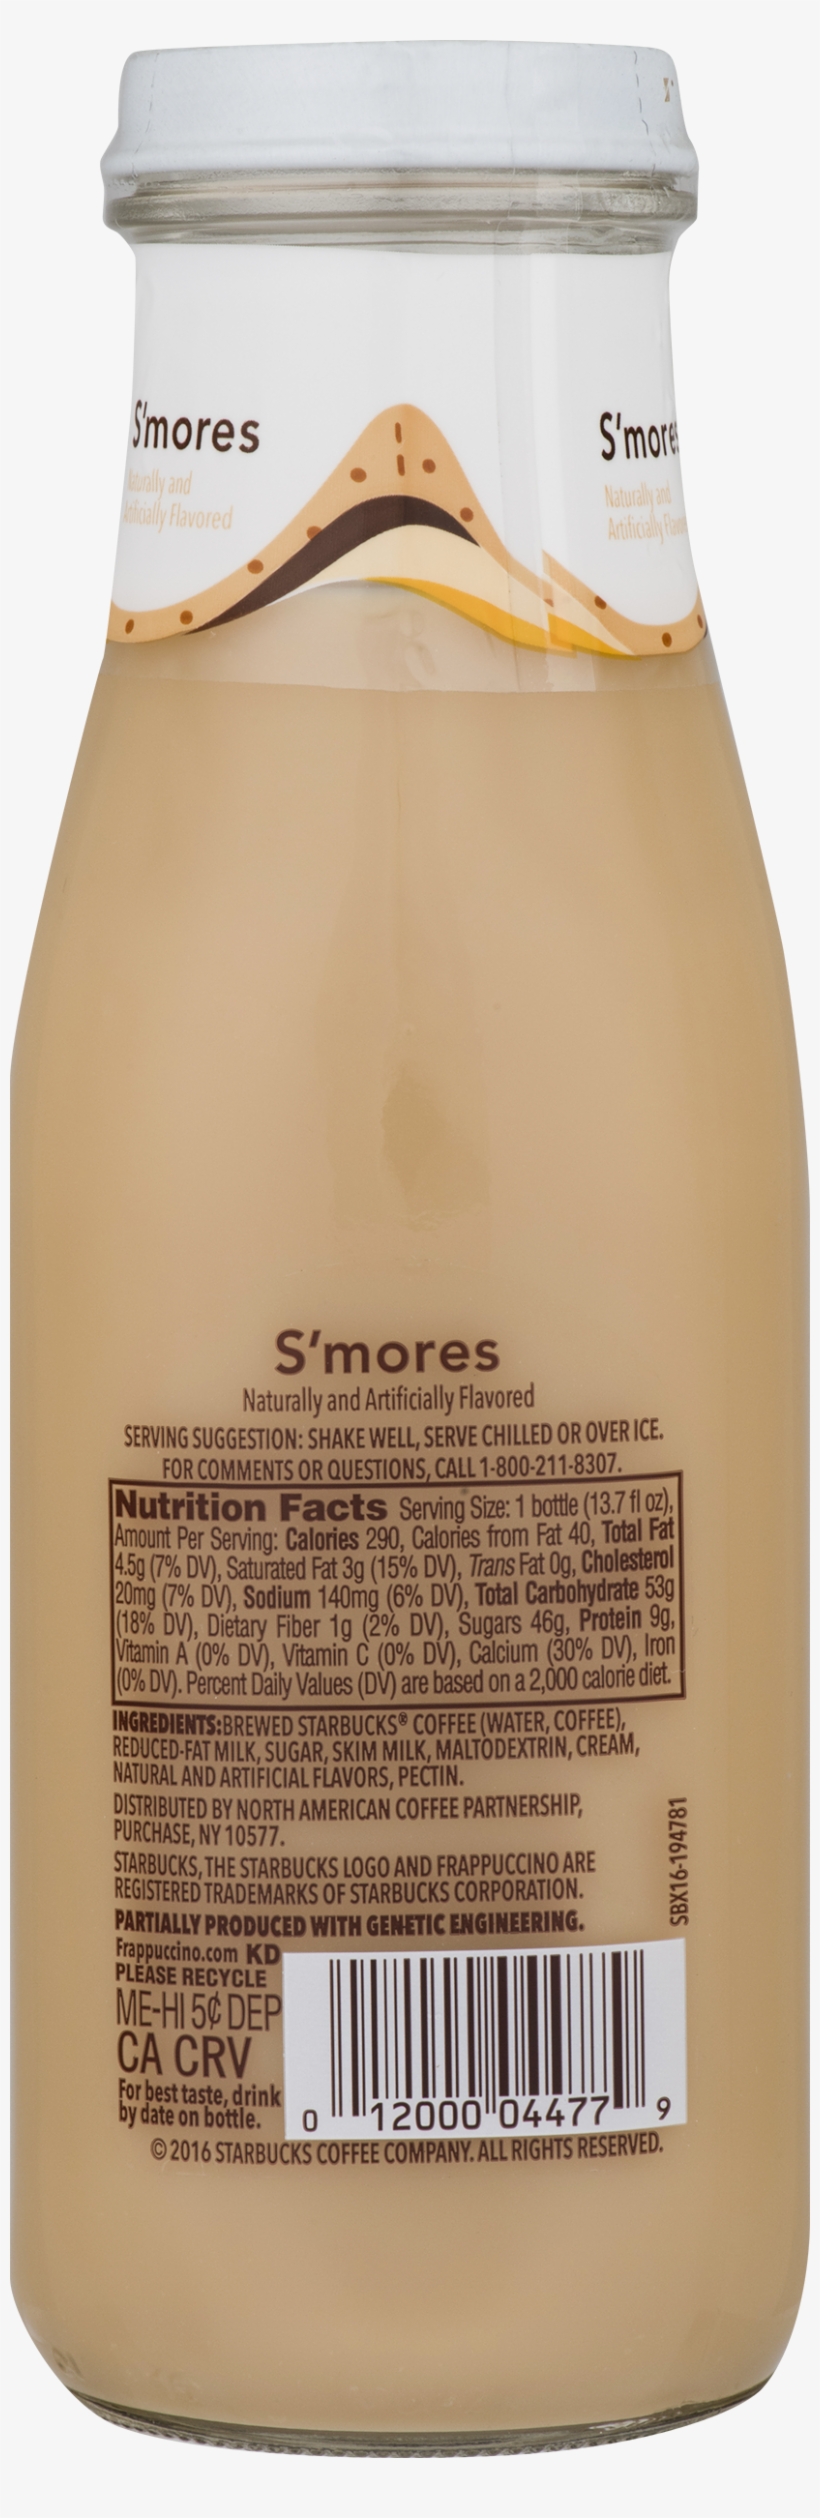 Starbucks Frappuccino Glass Bottle Nutrition, transparent png #2784472